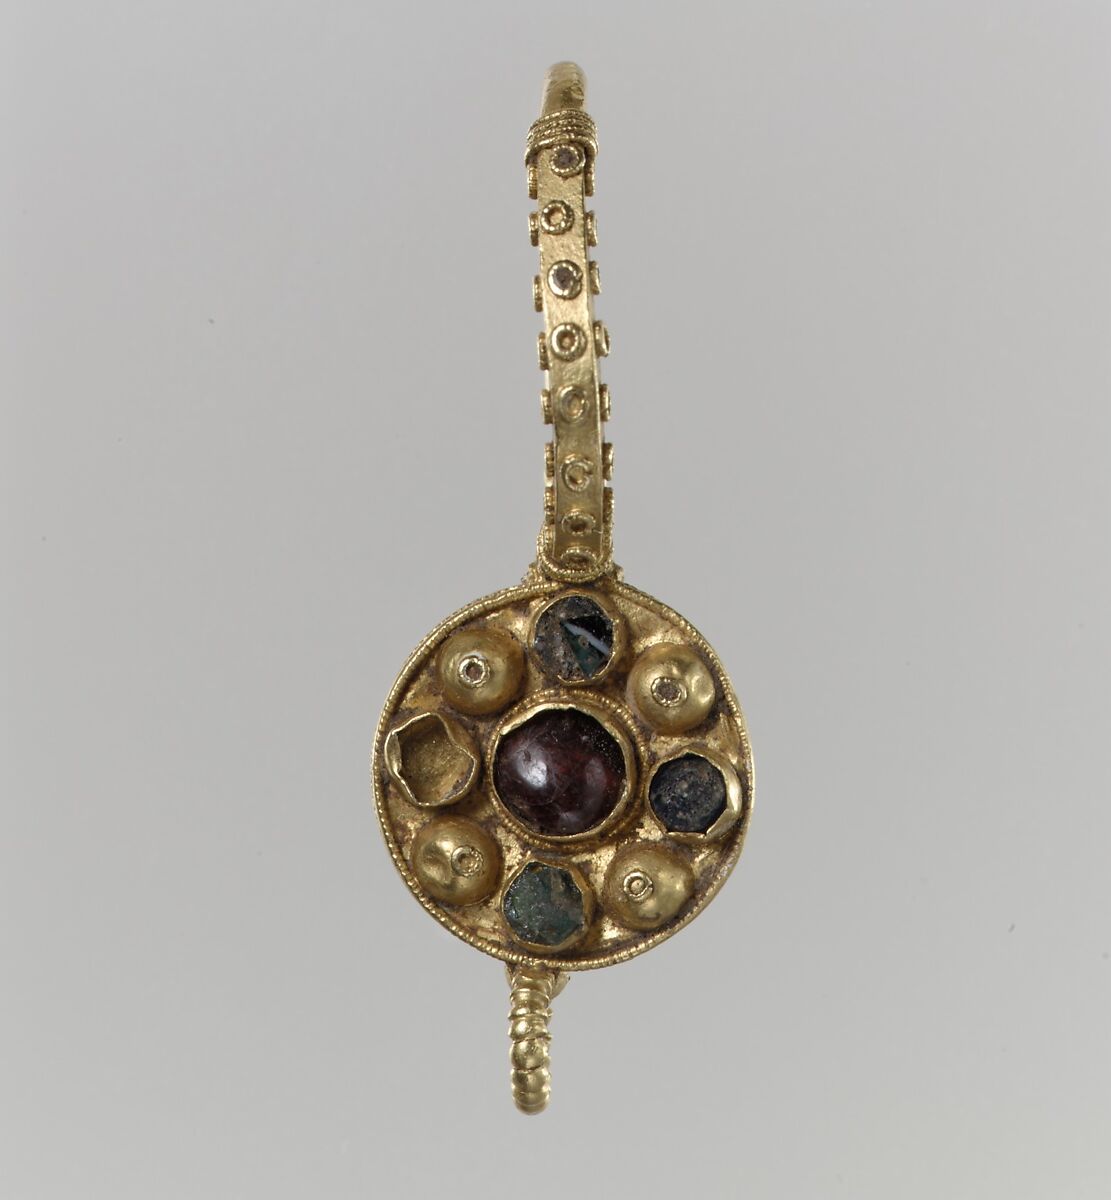 Earring, Gold, garnet, glass; inlays are possible restorations, Langobardic or Byzantine (?) 